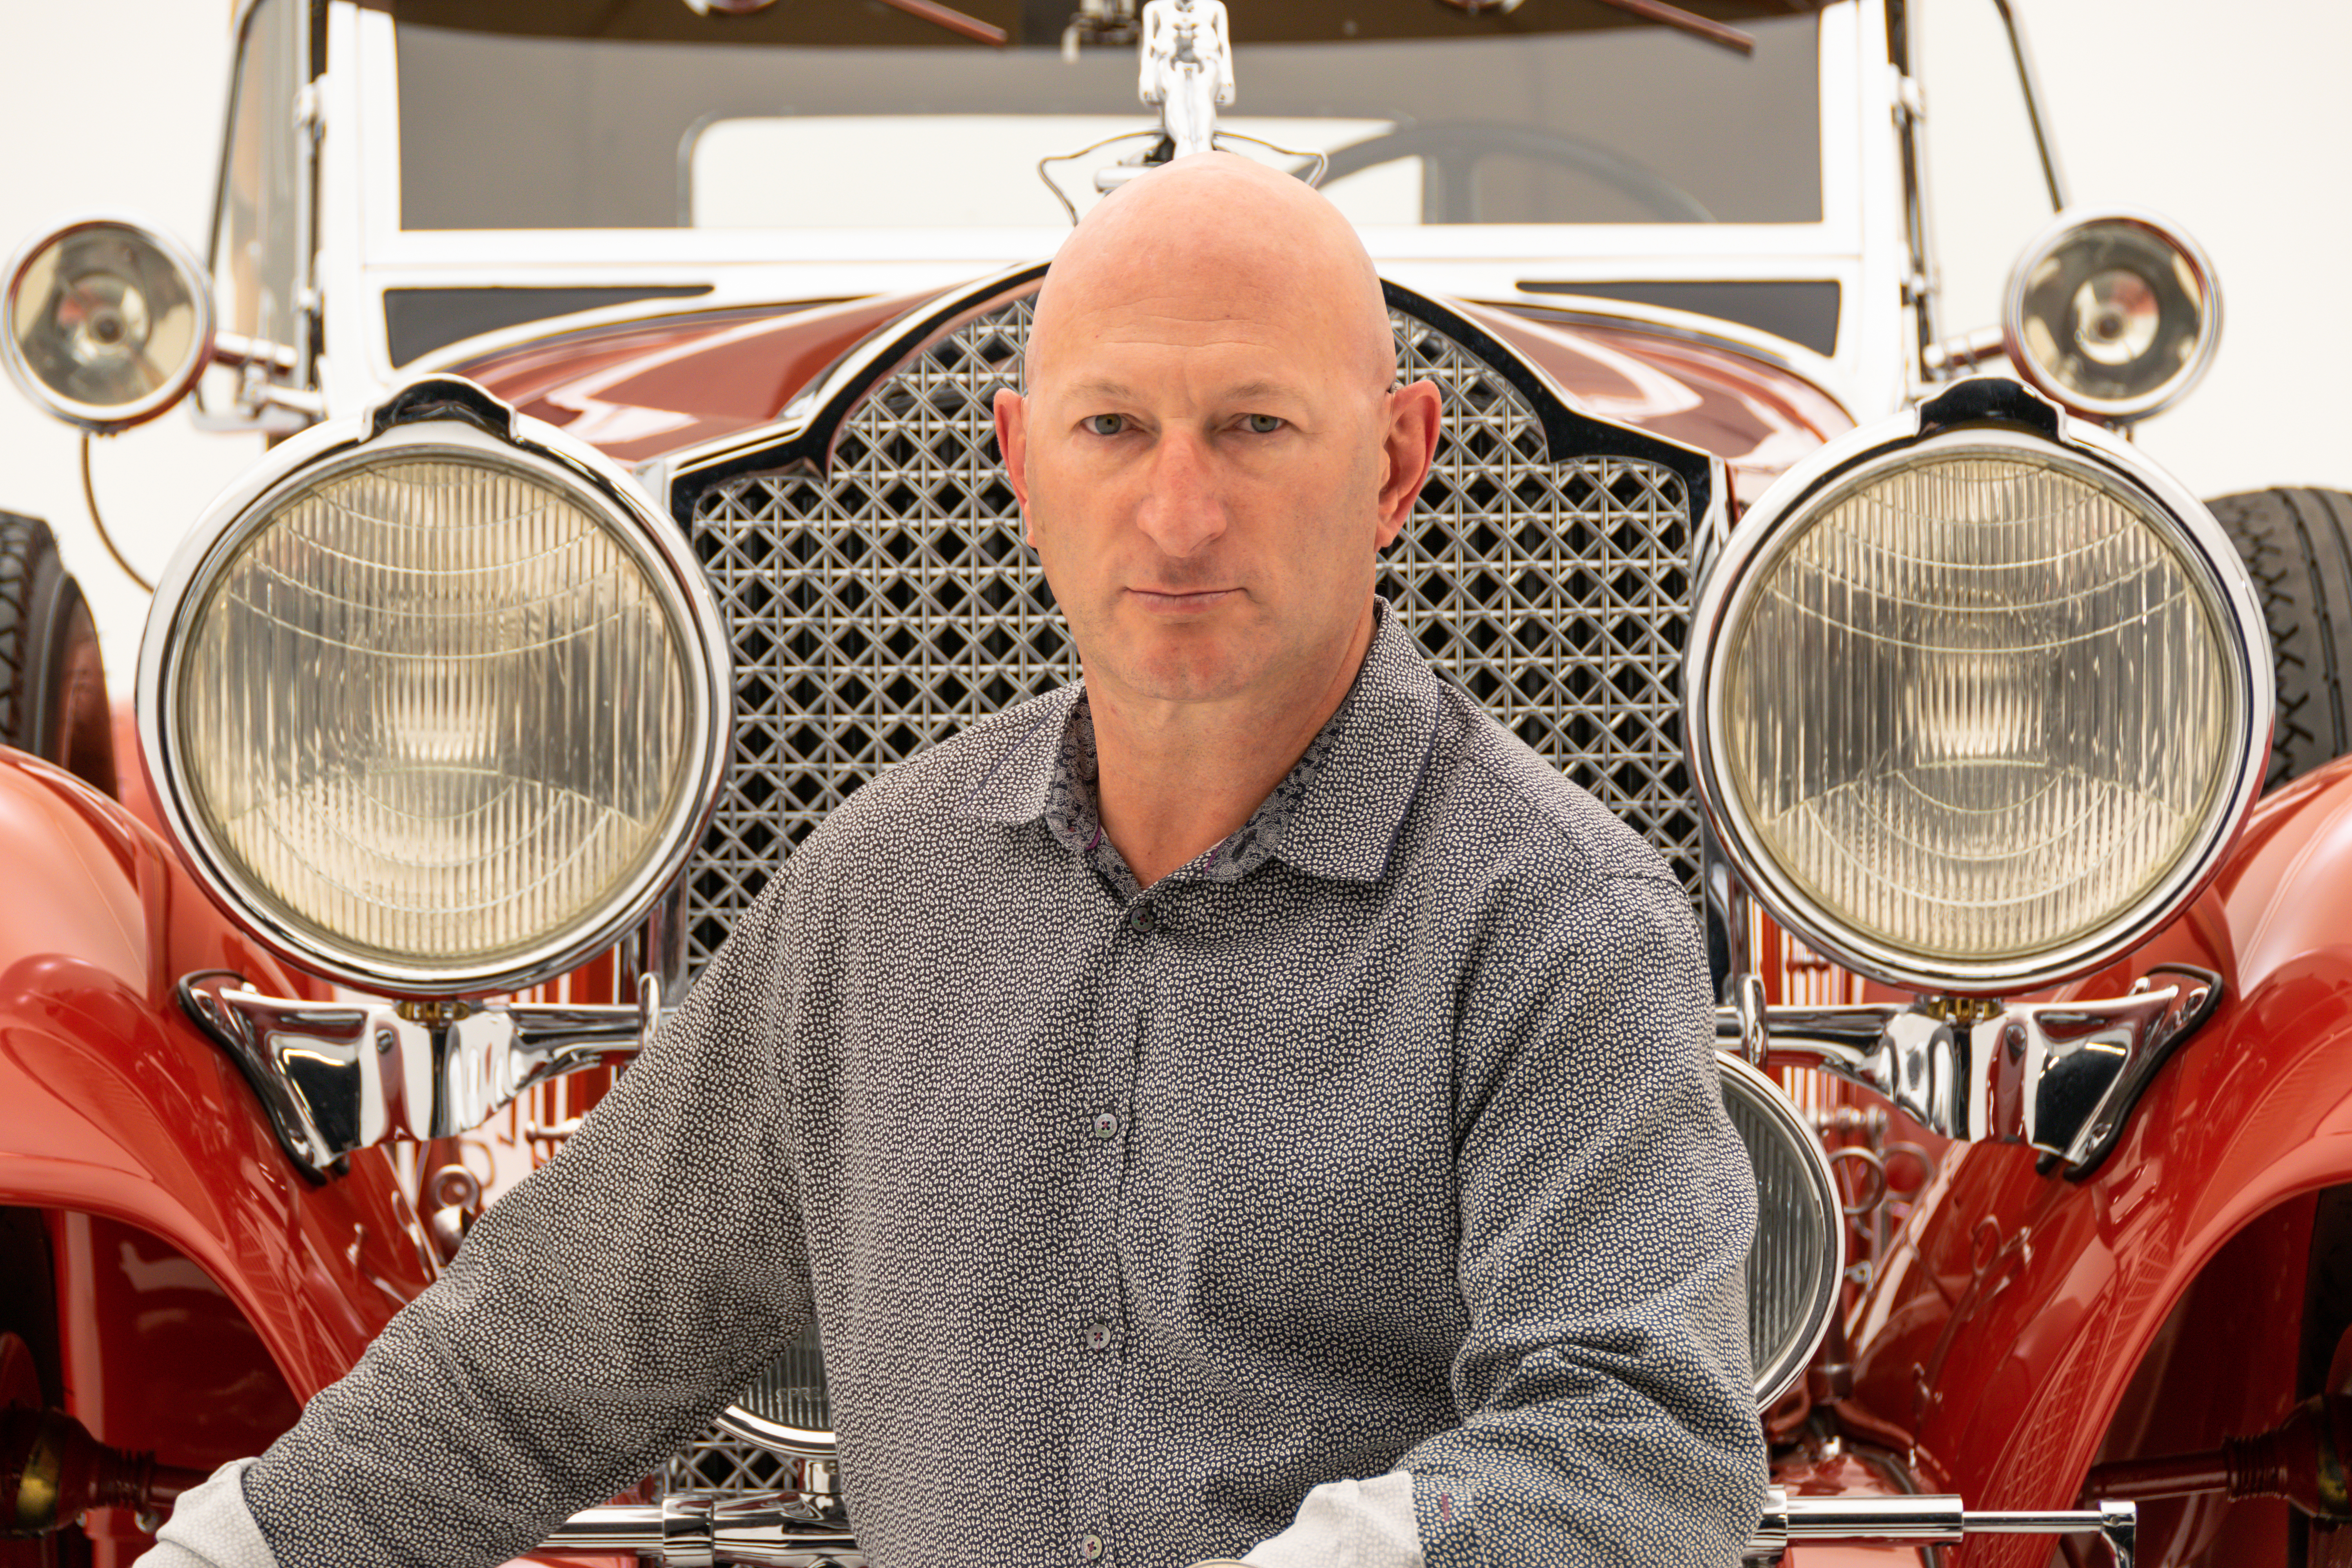 Mark Hyman, Mark Hyman speaks out, and speaks up for the car-collecting community, ClassicCars.com Journal